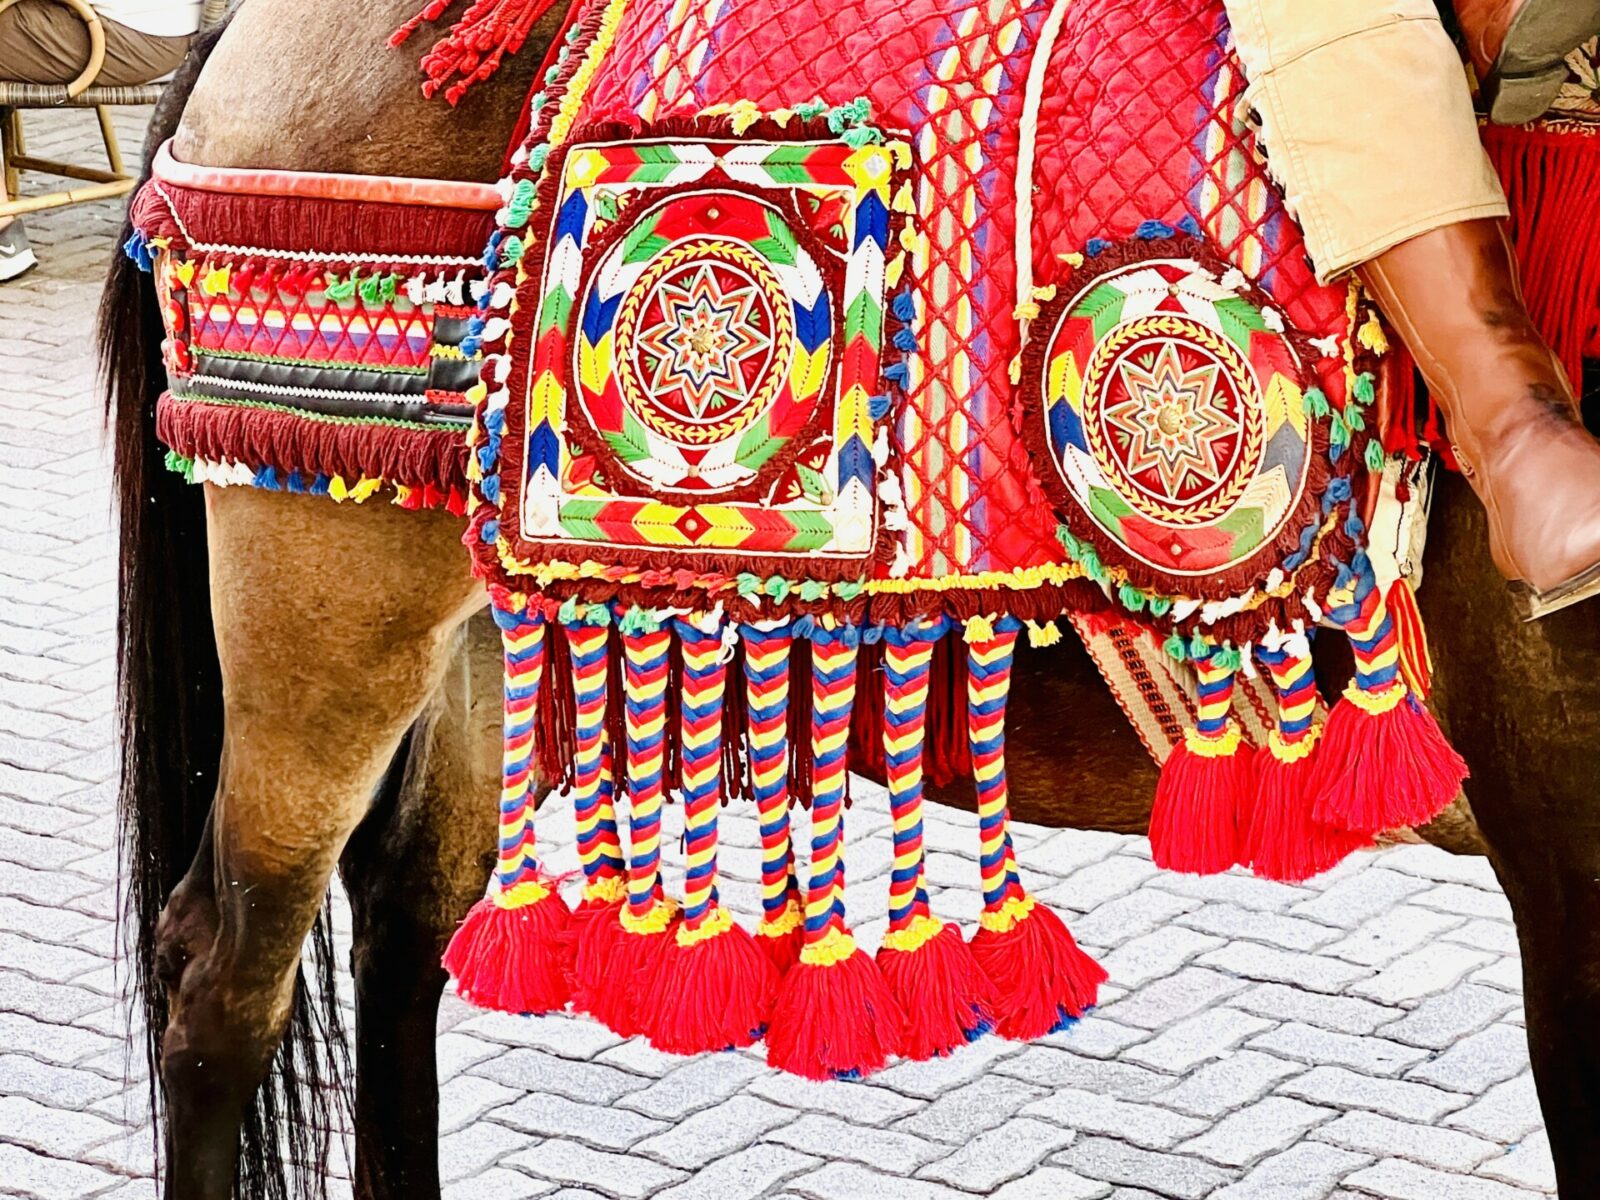 The image shows the vibrant colours of the traditional dress adorning the horses at the Competa Summer Feria.